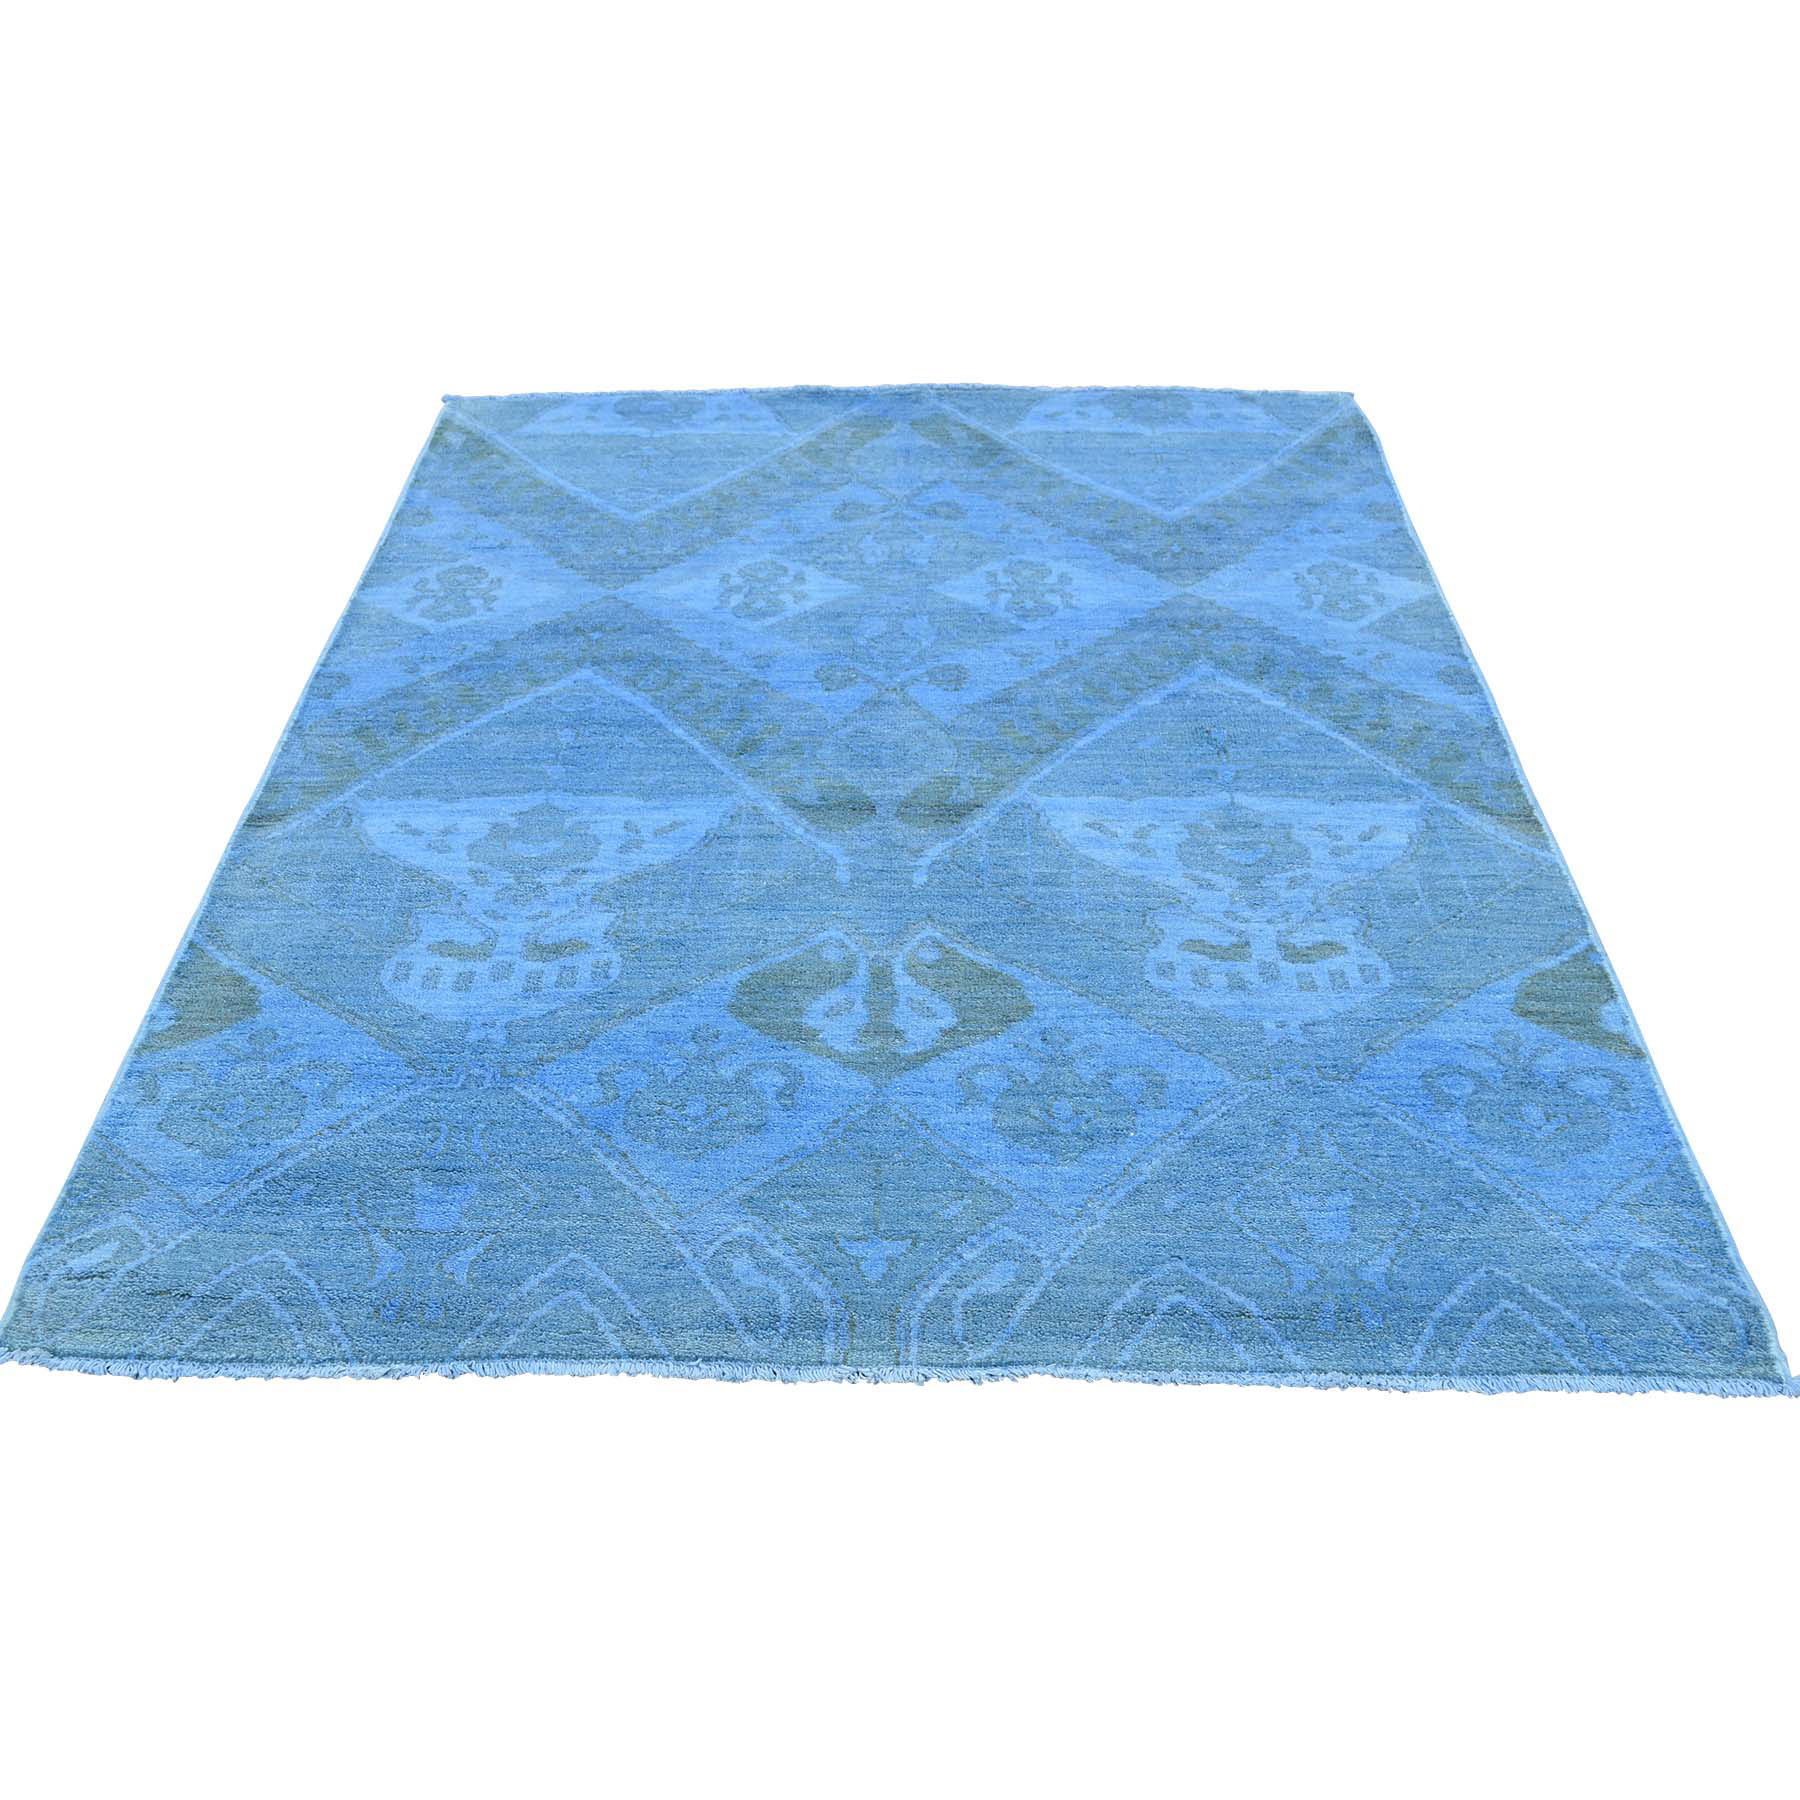 4'1"x5'7" Hand Woven Sky Blue Cast Ikat Overdyed Pure Wool Oriental Rug 